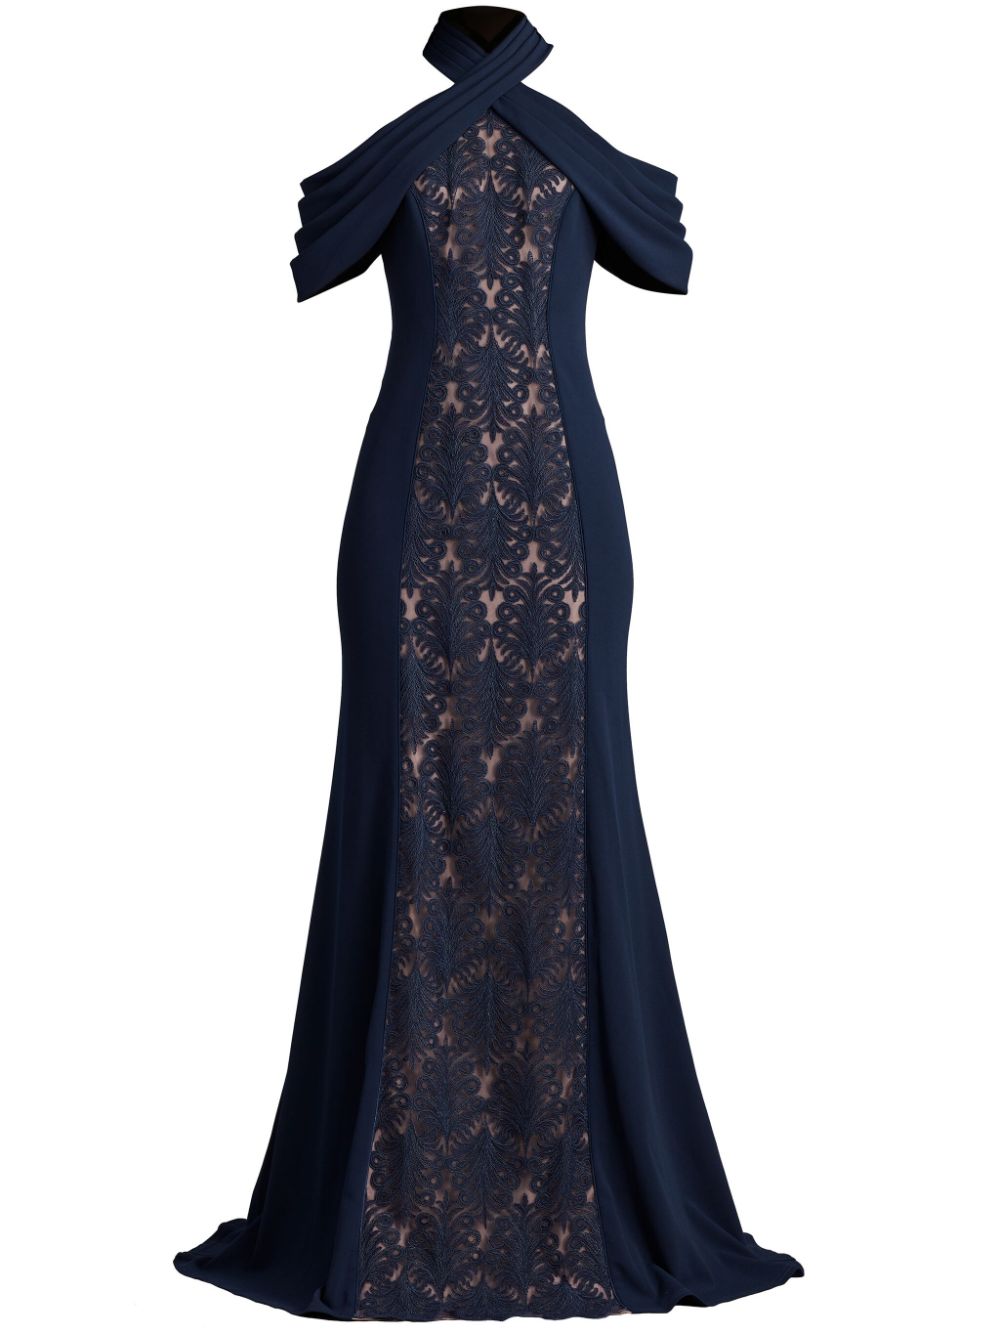 Kate embroidered gown